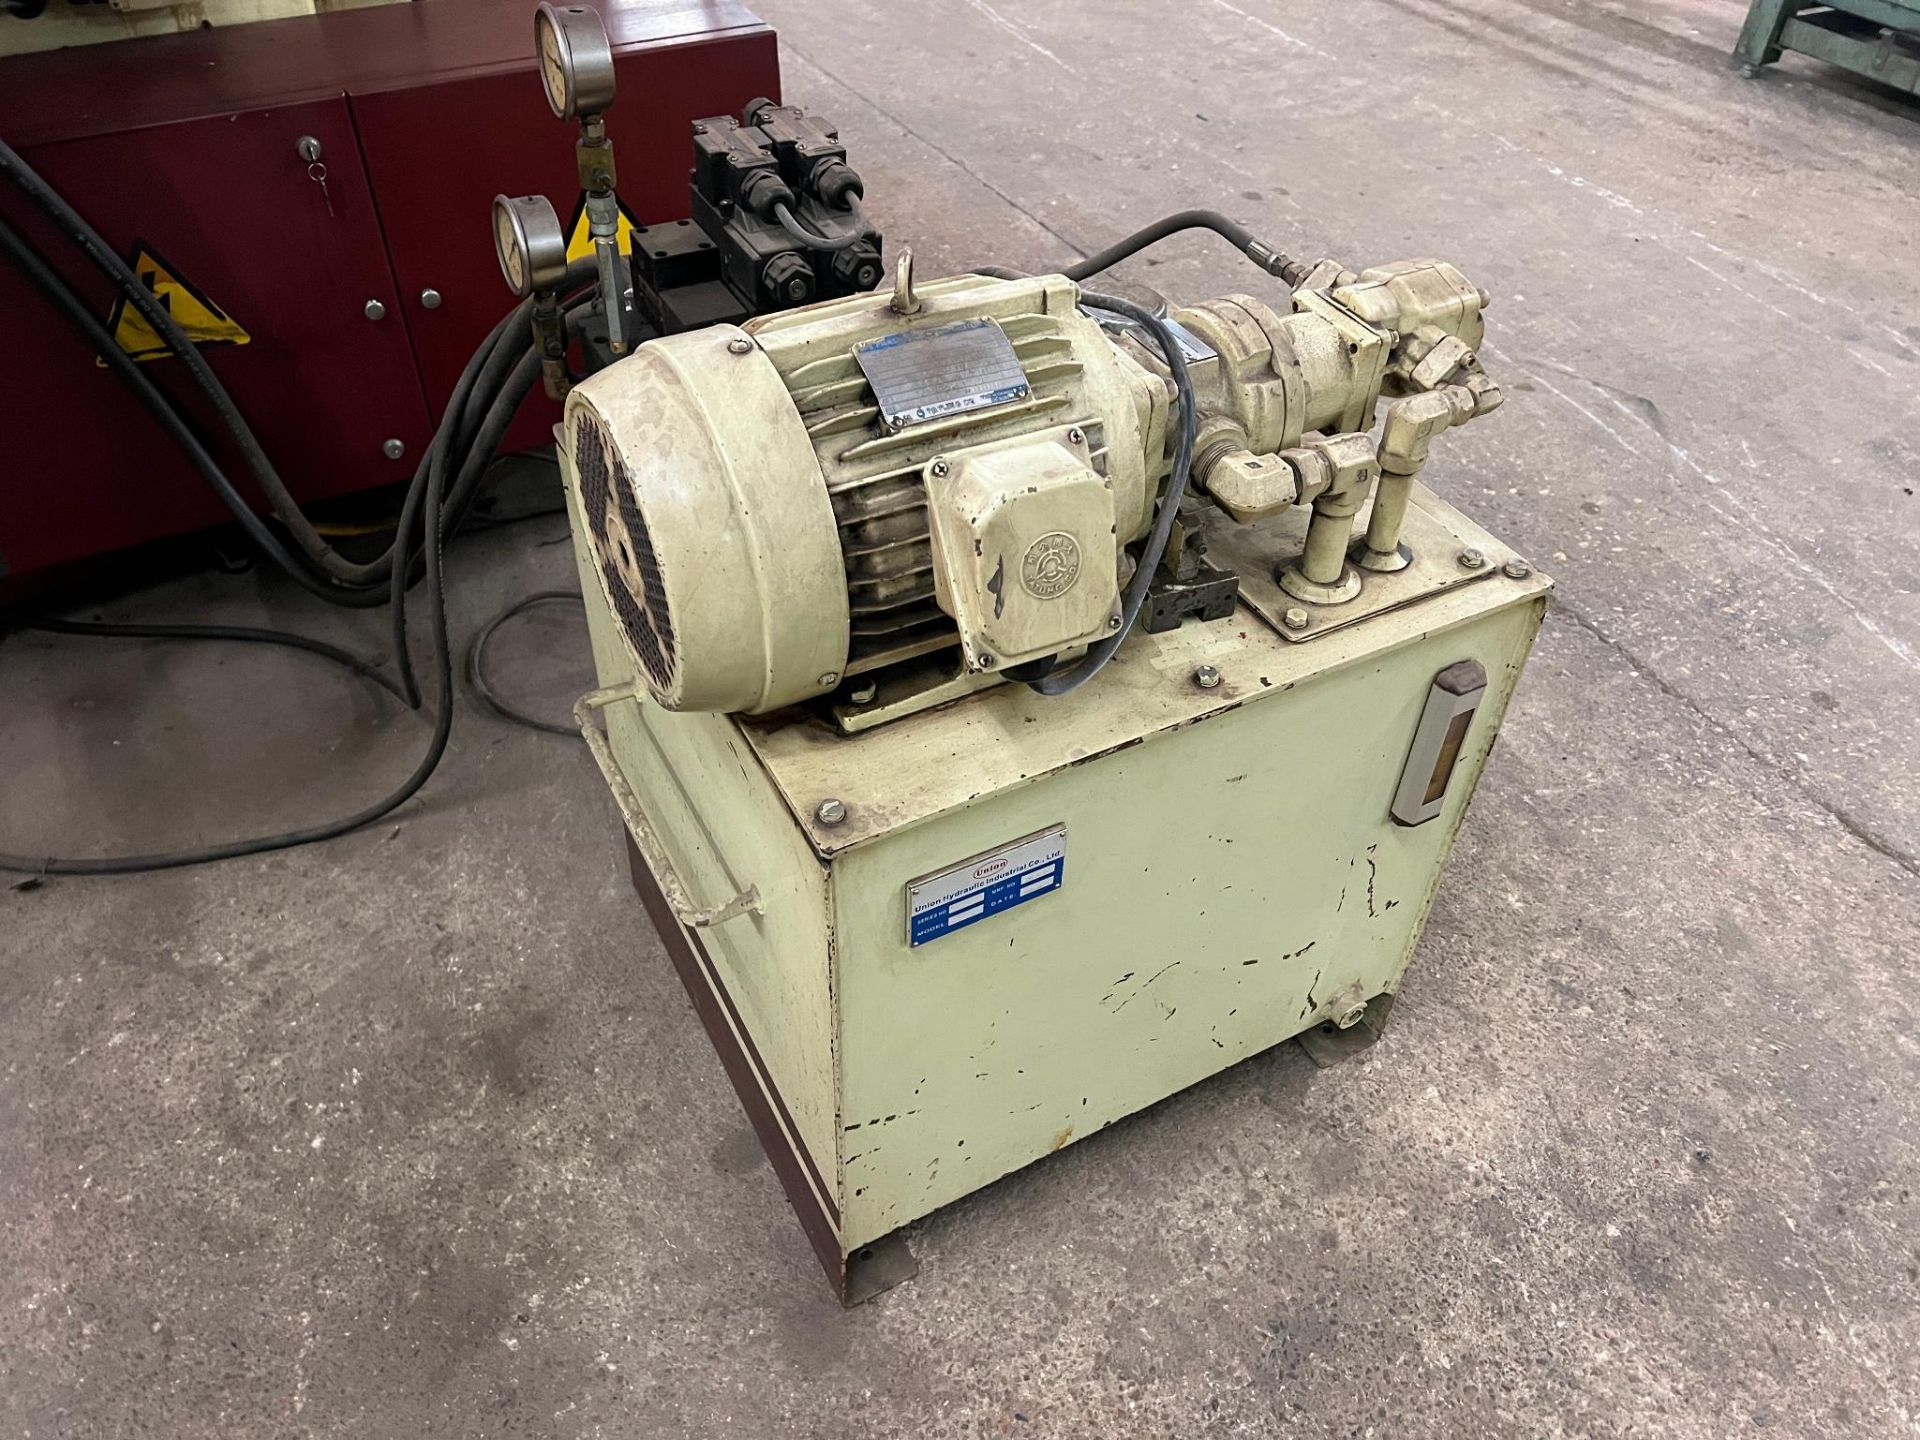 2005 Acer AGS-1224AHD Hydraulic Surface Grinder, Serial Number: s/n N5070188, 3-Axis, Automatic Hydr - Image 9 of 26